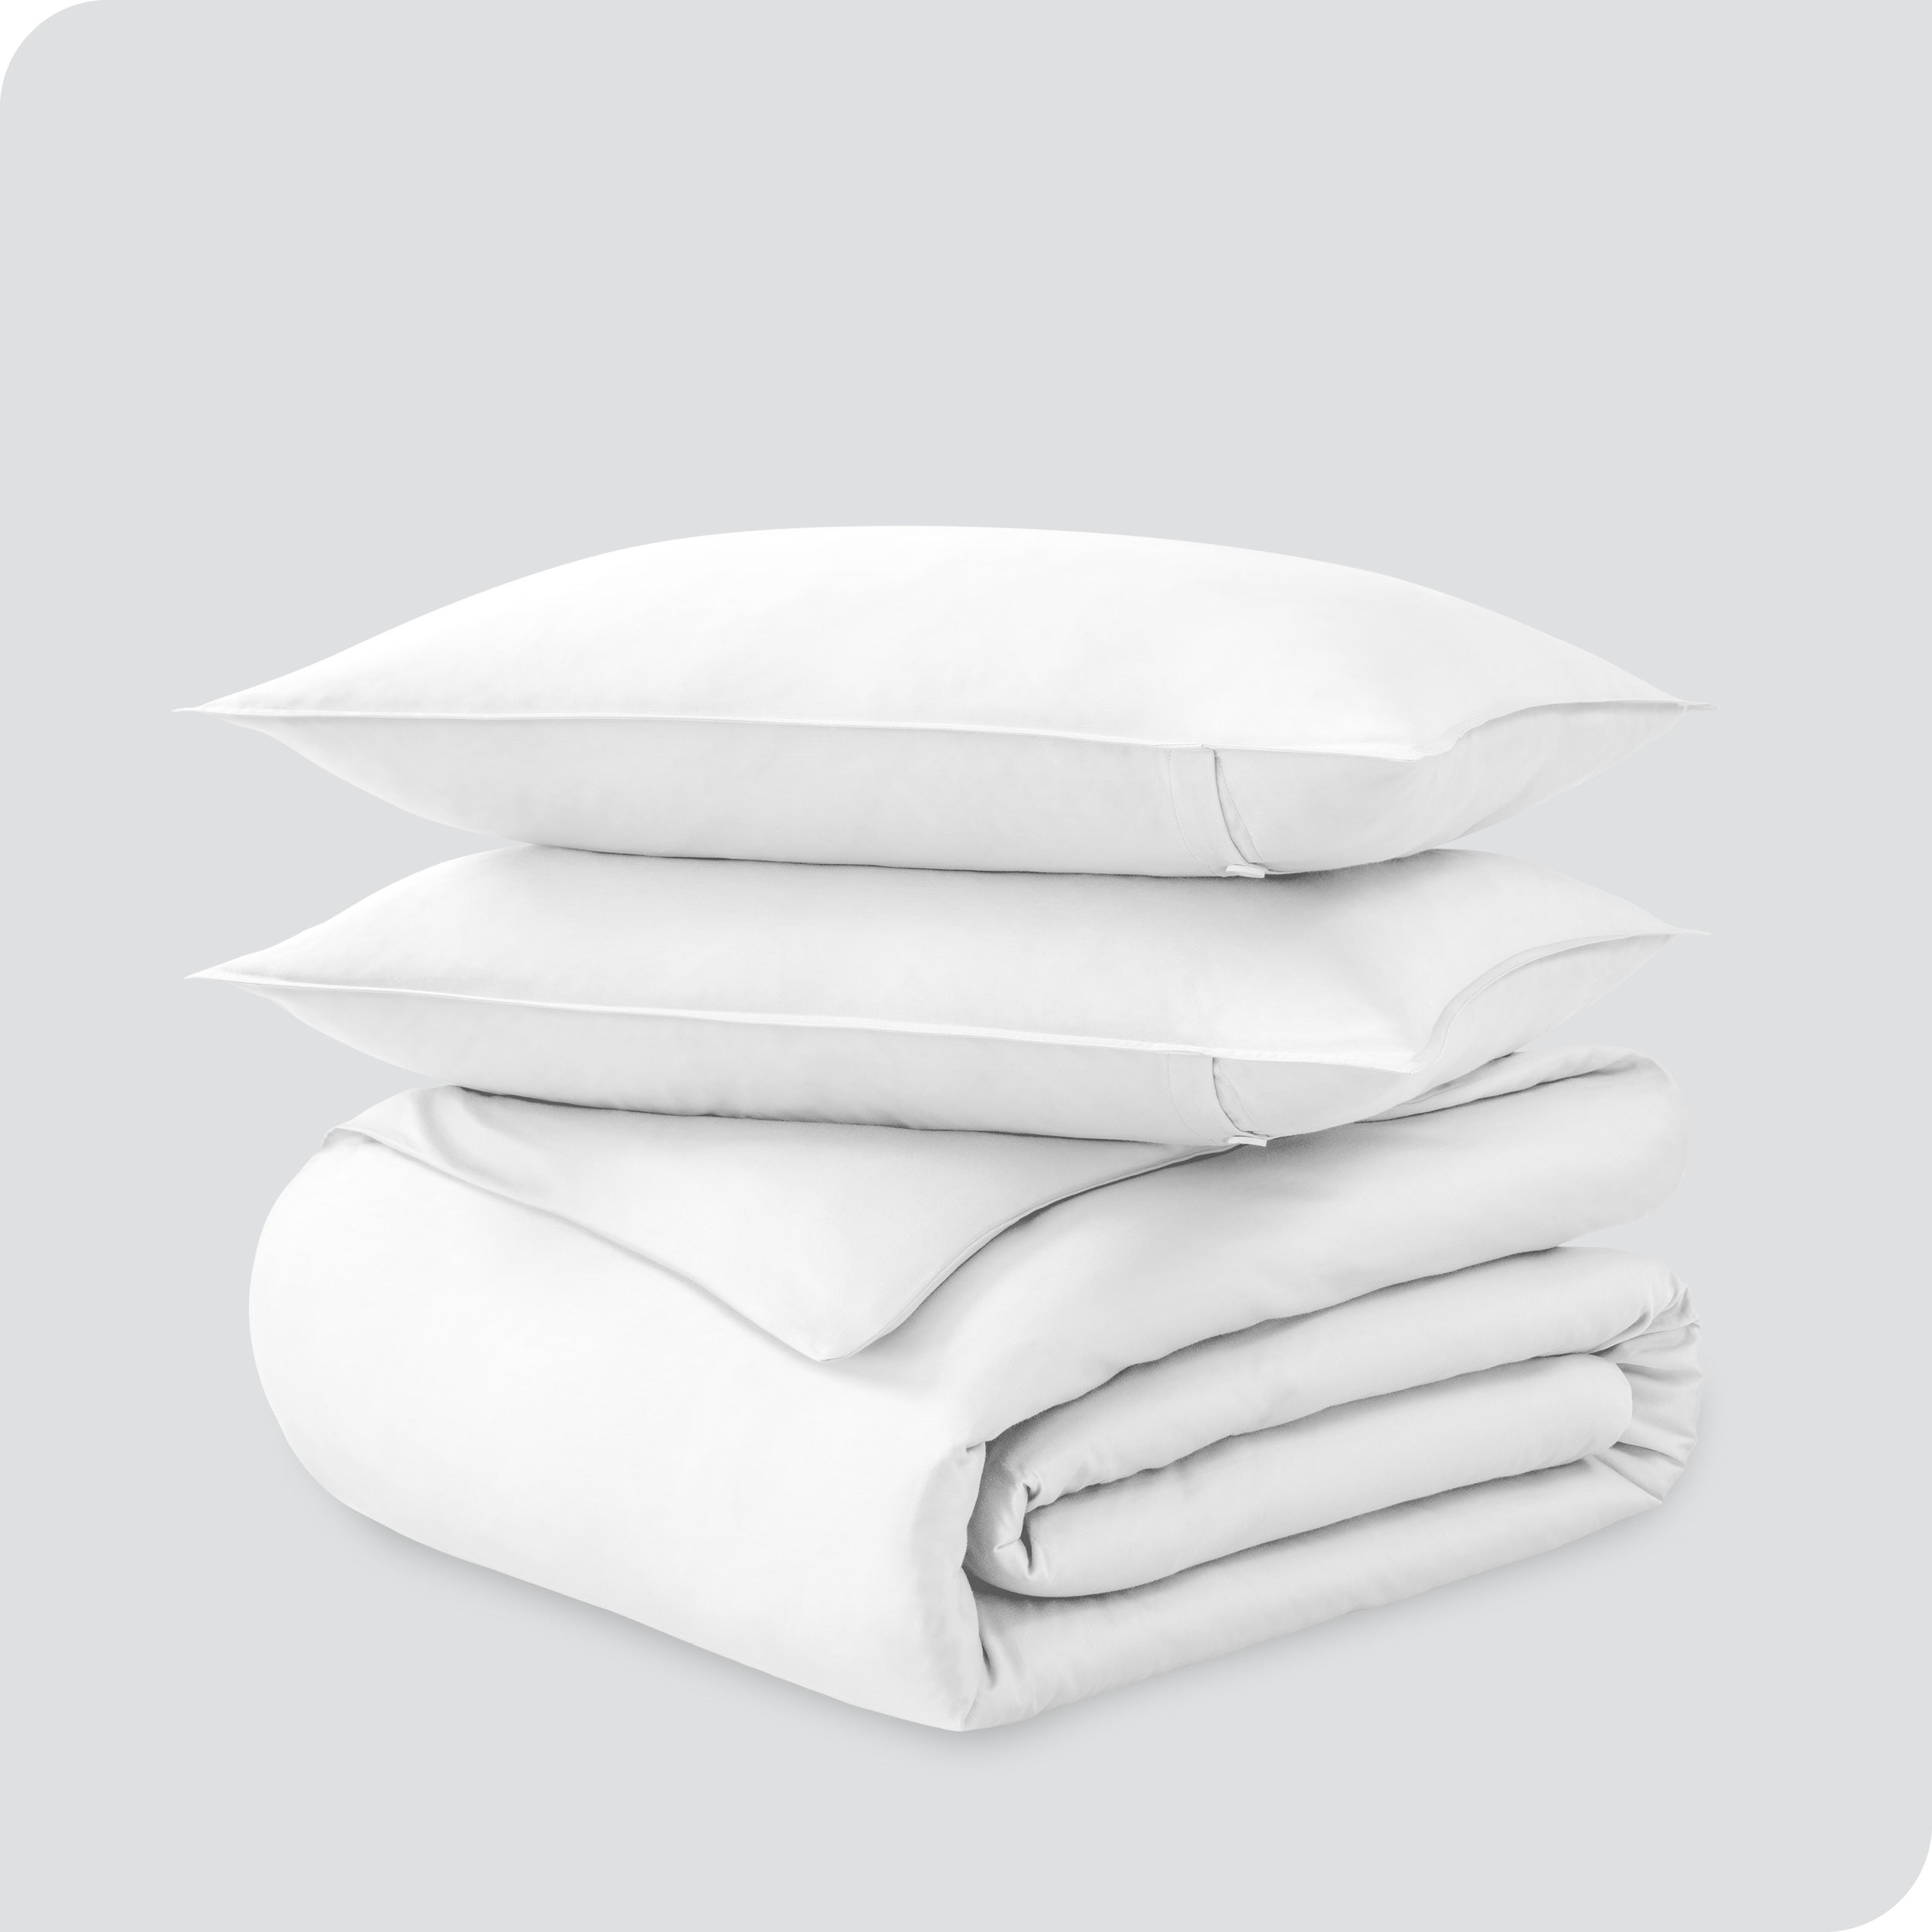 A folded organic sateen duvet cover with two pillows on top.